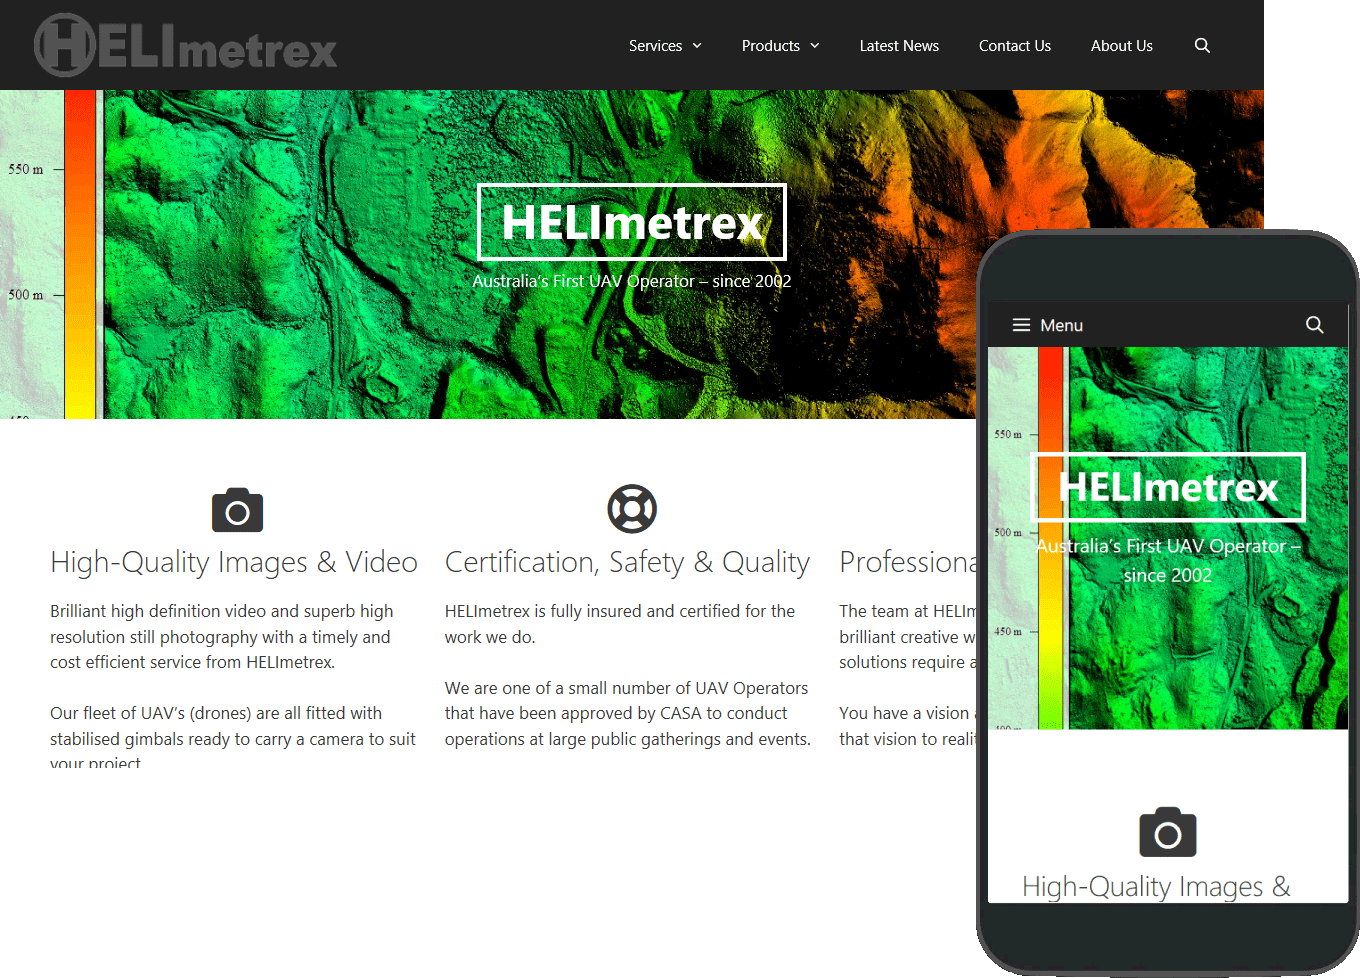 HELImetrex porfolio image, full web page and mobile view